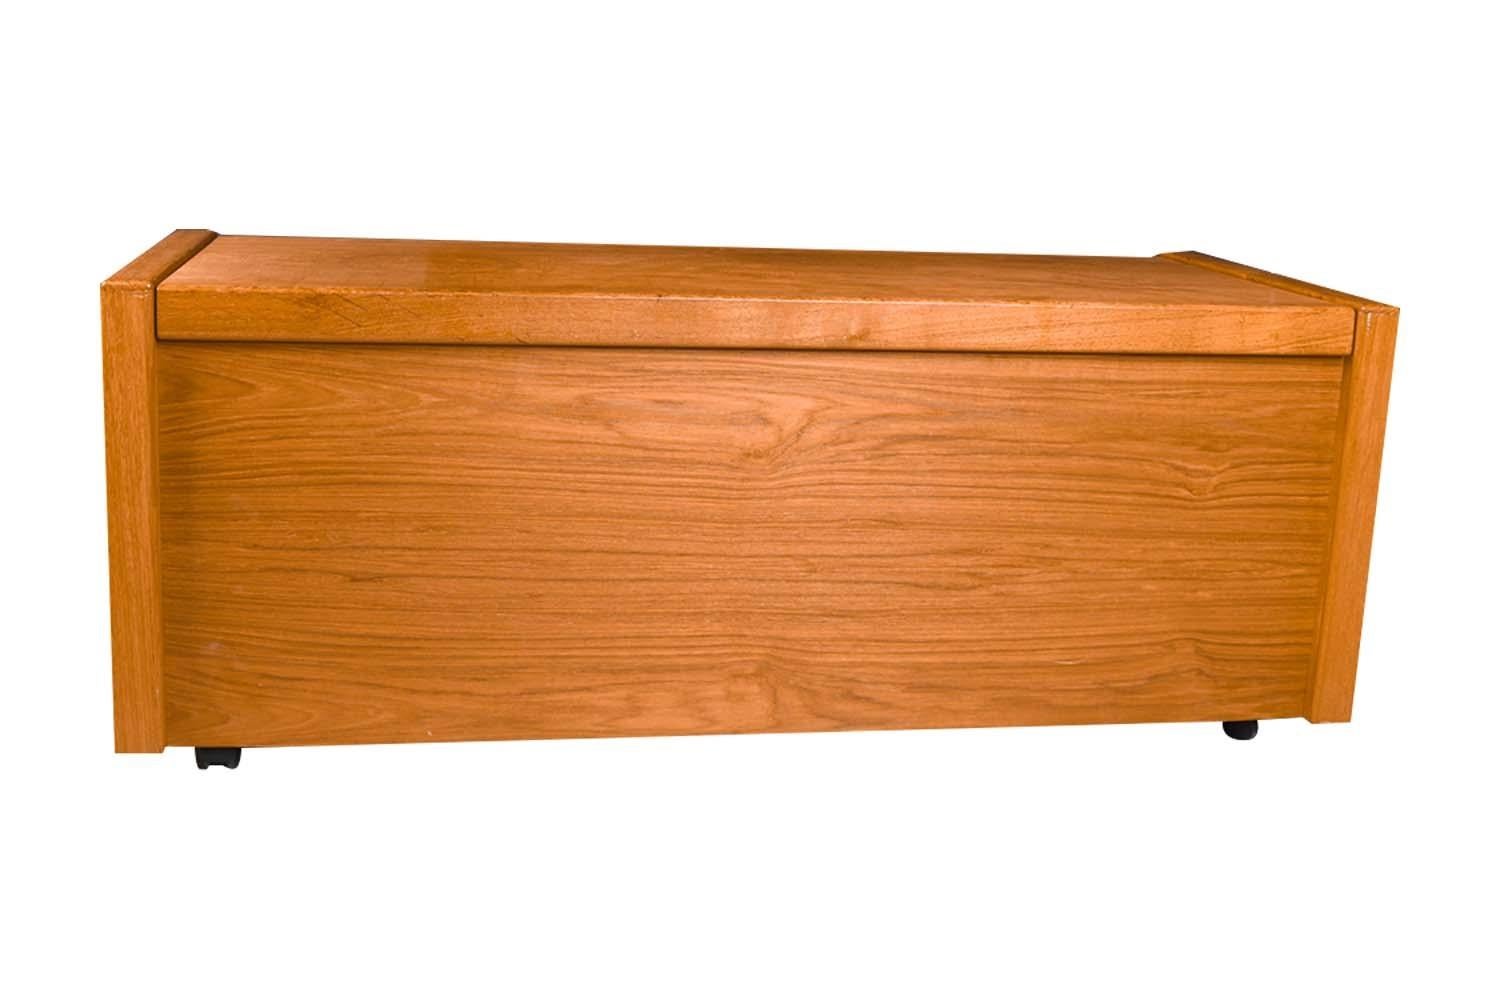 A beautiful Danish modern midcentury teak blanket storage/chest. This large vintage Danish teak blanket chest/storage trunk features spacious storage. Precisely crafted in exceptional teak wood grain, with a fully finished back and interior. The